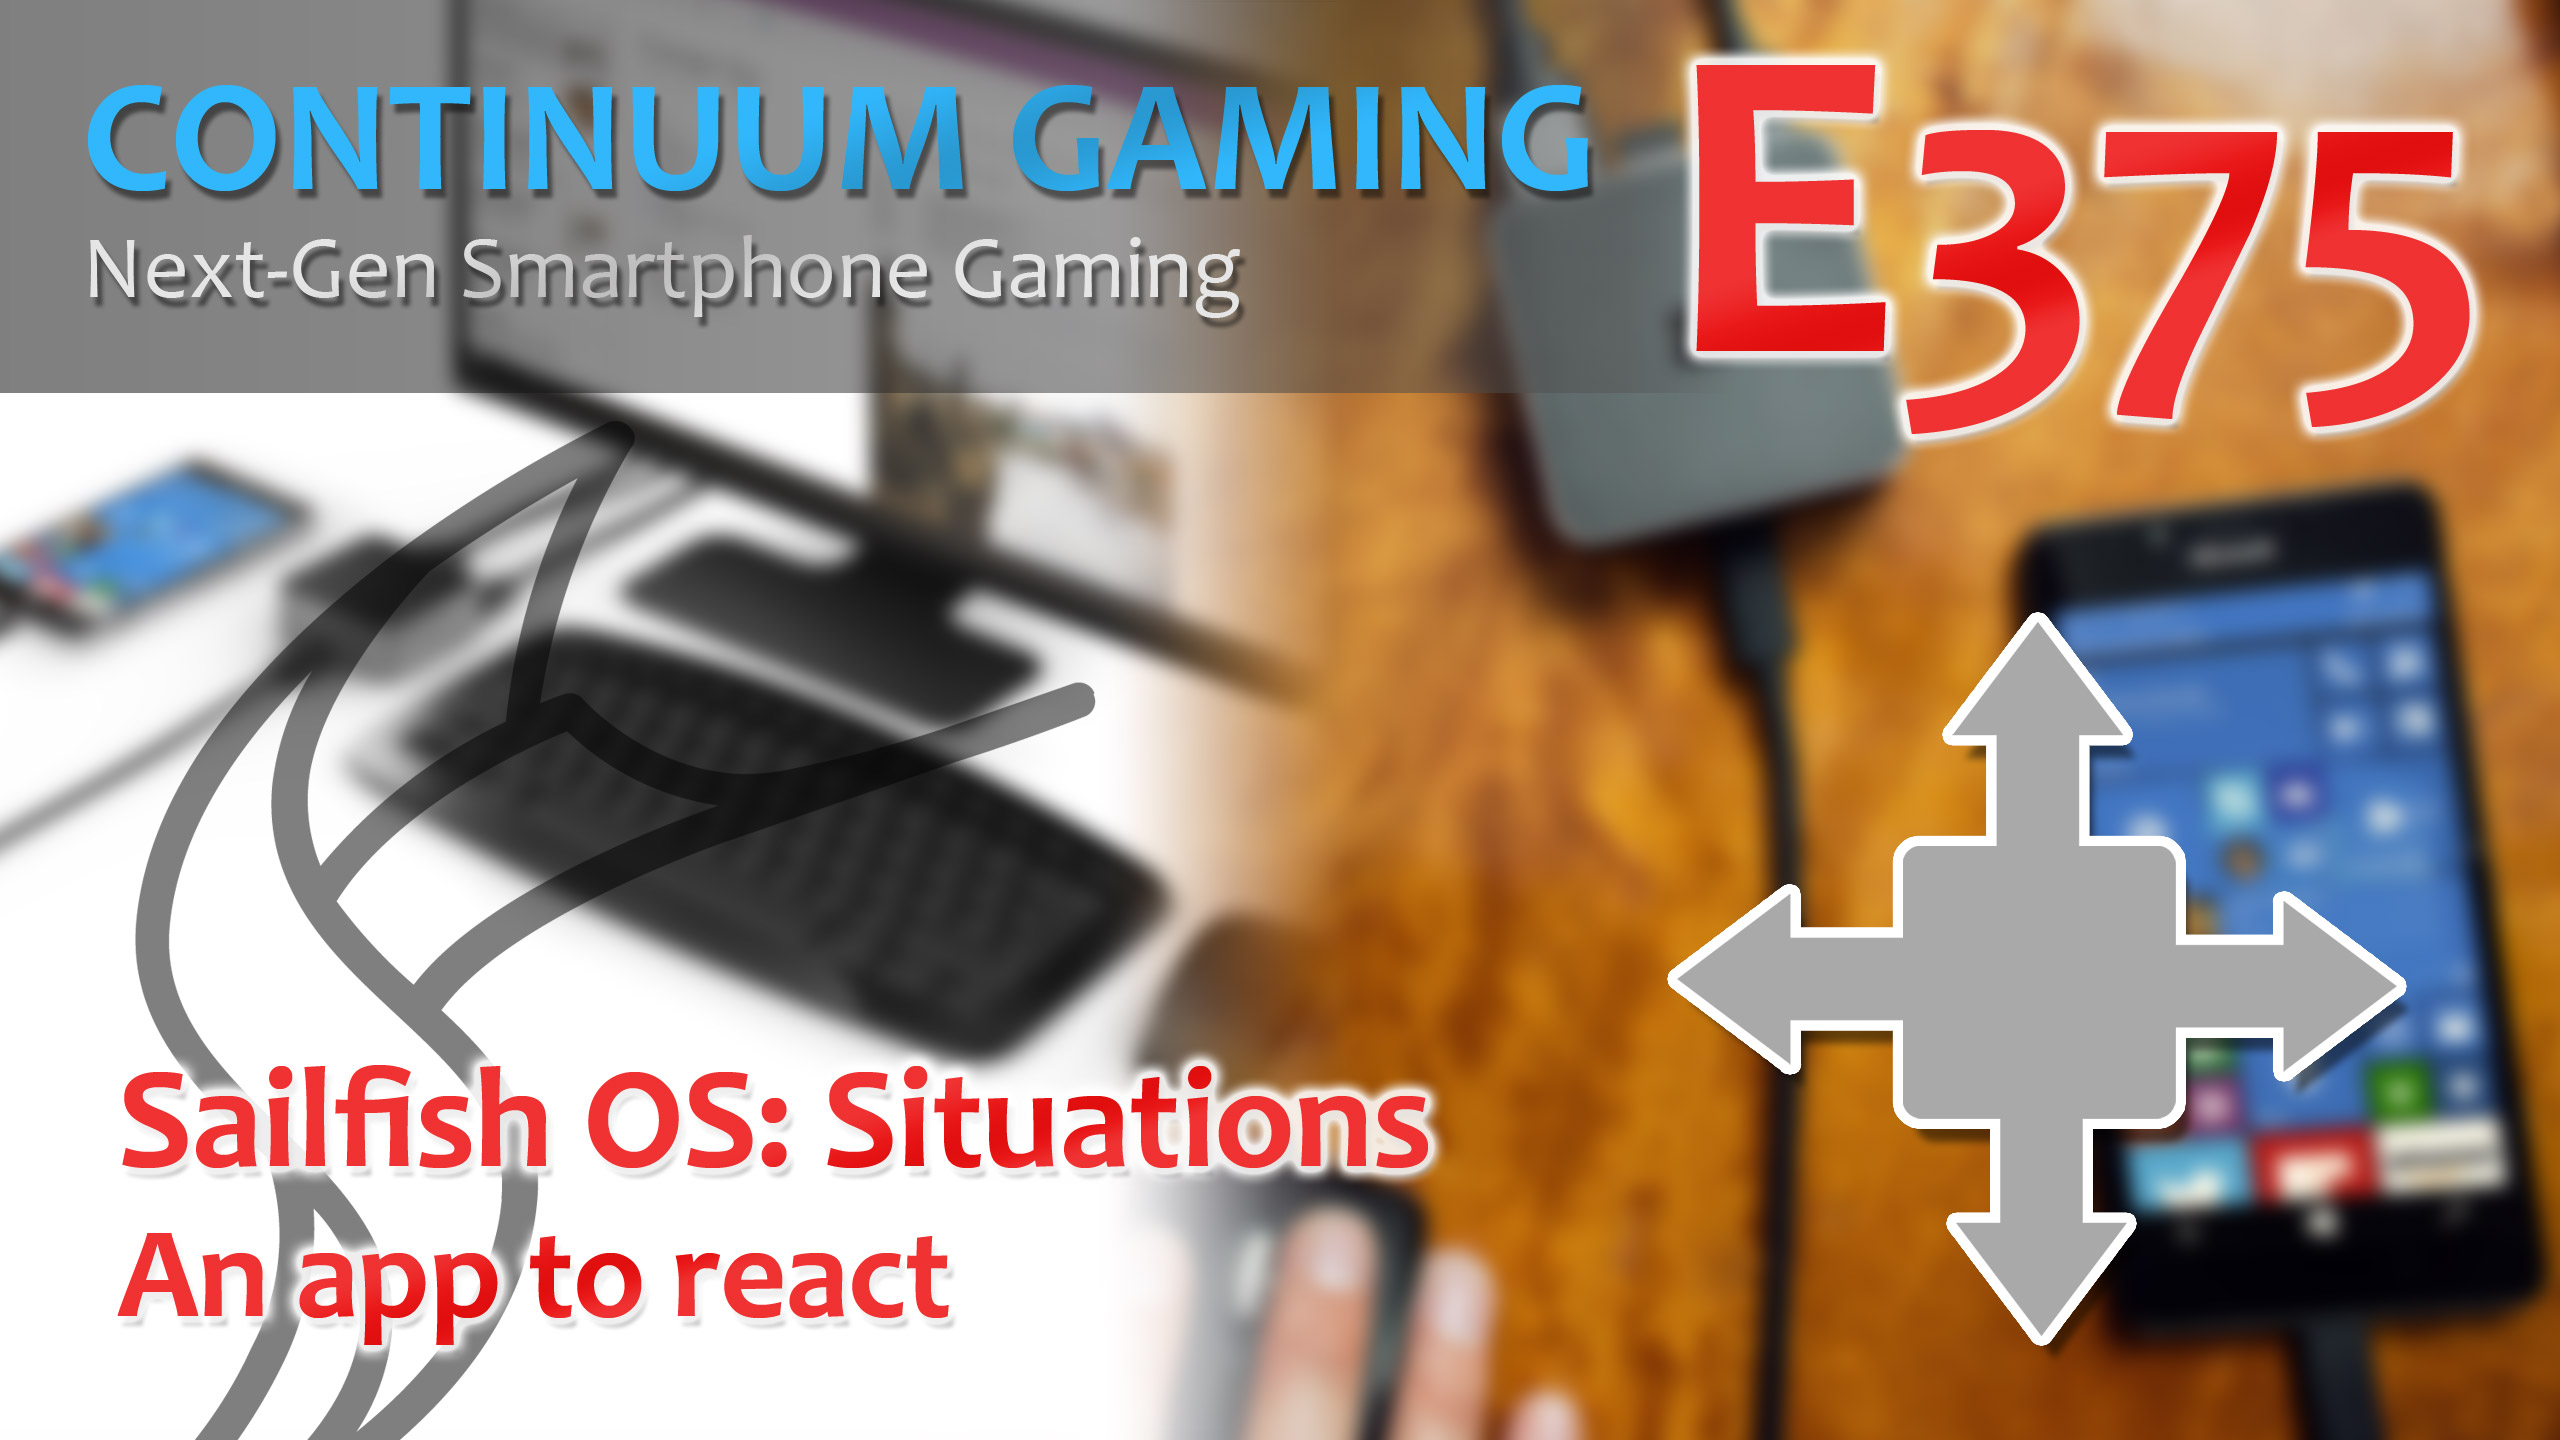 Youtube Continuum Gaming E375: Situations